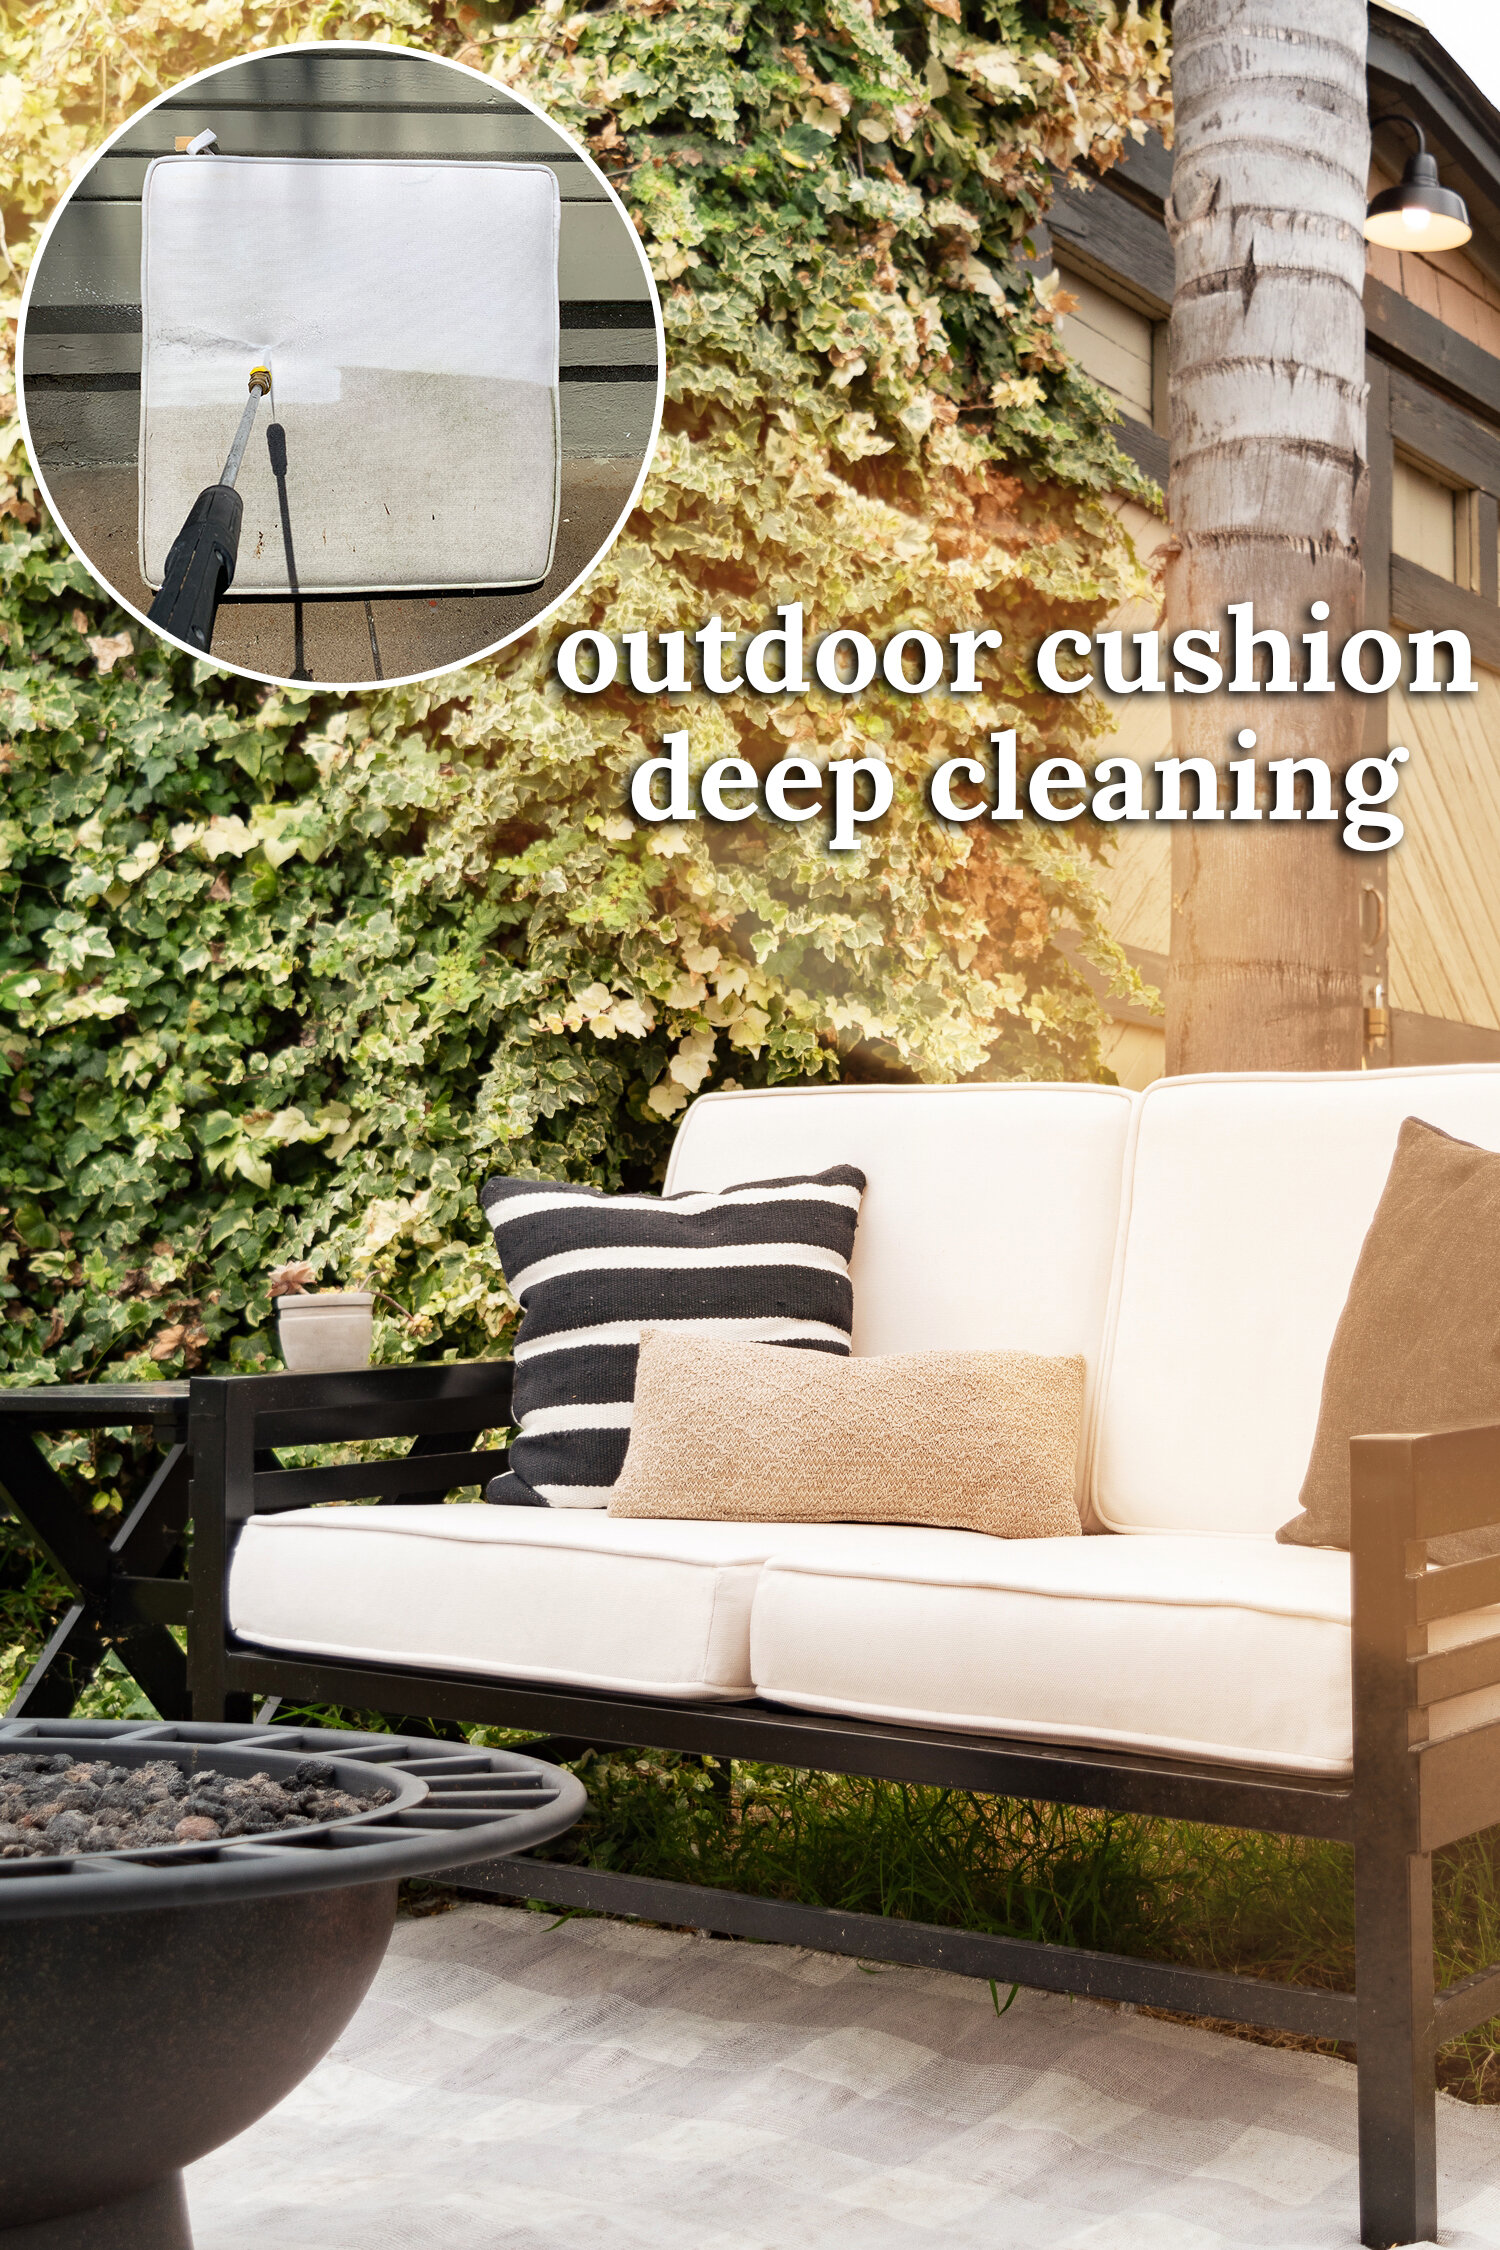 Pressure Washing My Outdoor Cushions, How To Wash Outdoor Cushion Covers In Washing Machine